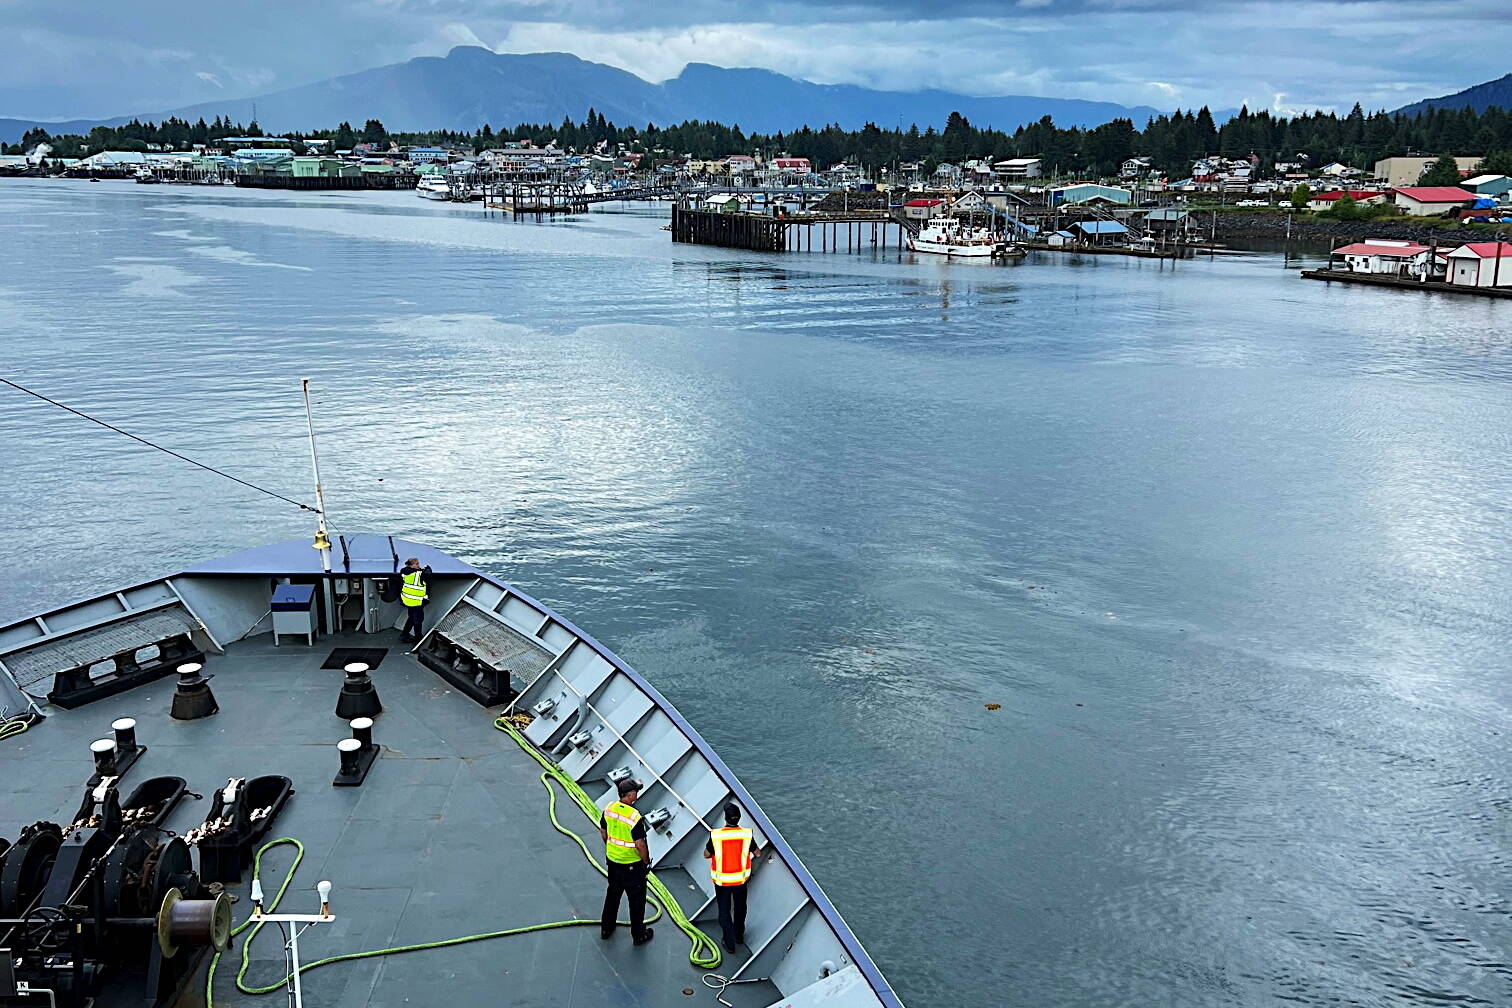 Meredith Jordan / Juneau Empire
Members of the deck department of the Columbia state ferry get ready to dock the vessel in Petersburg on July 17. A change in the accounting department is expected to lessen the number of payroll complaints among Alaska Marine Highway System employees.